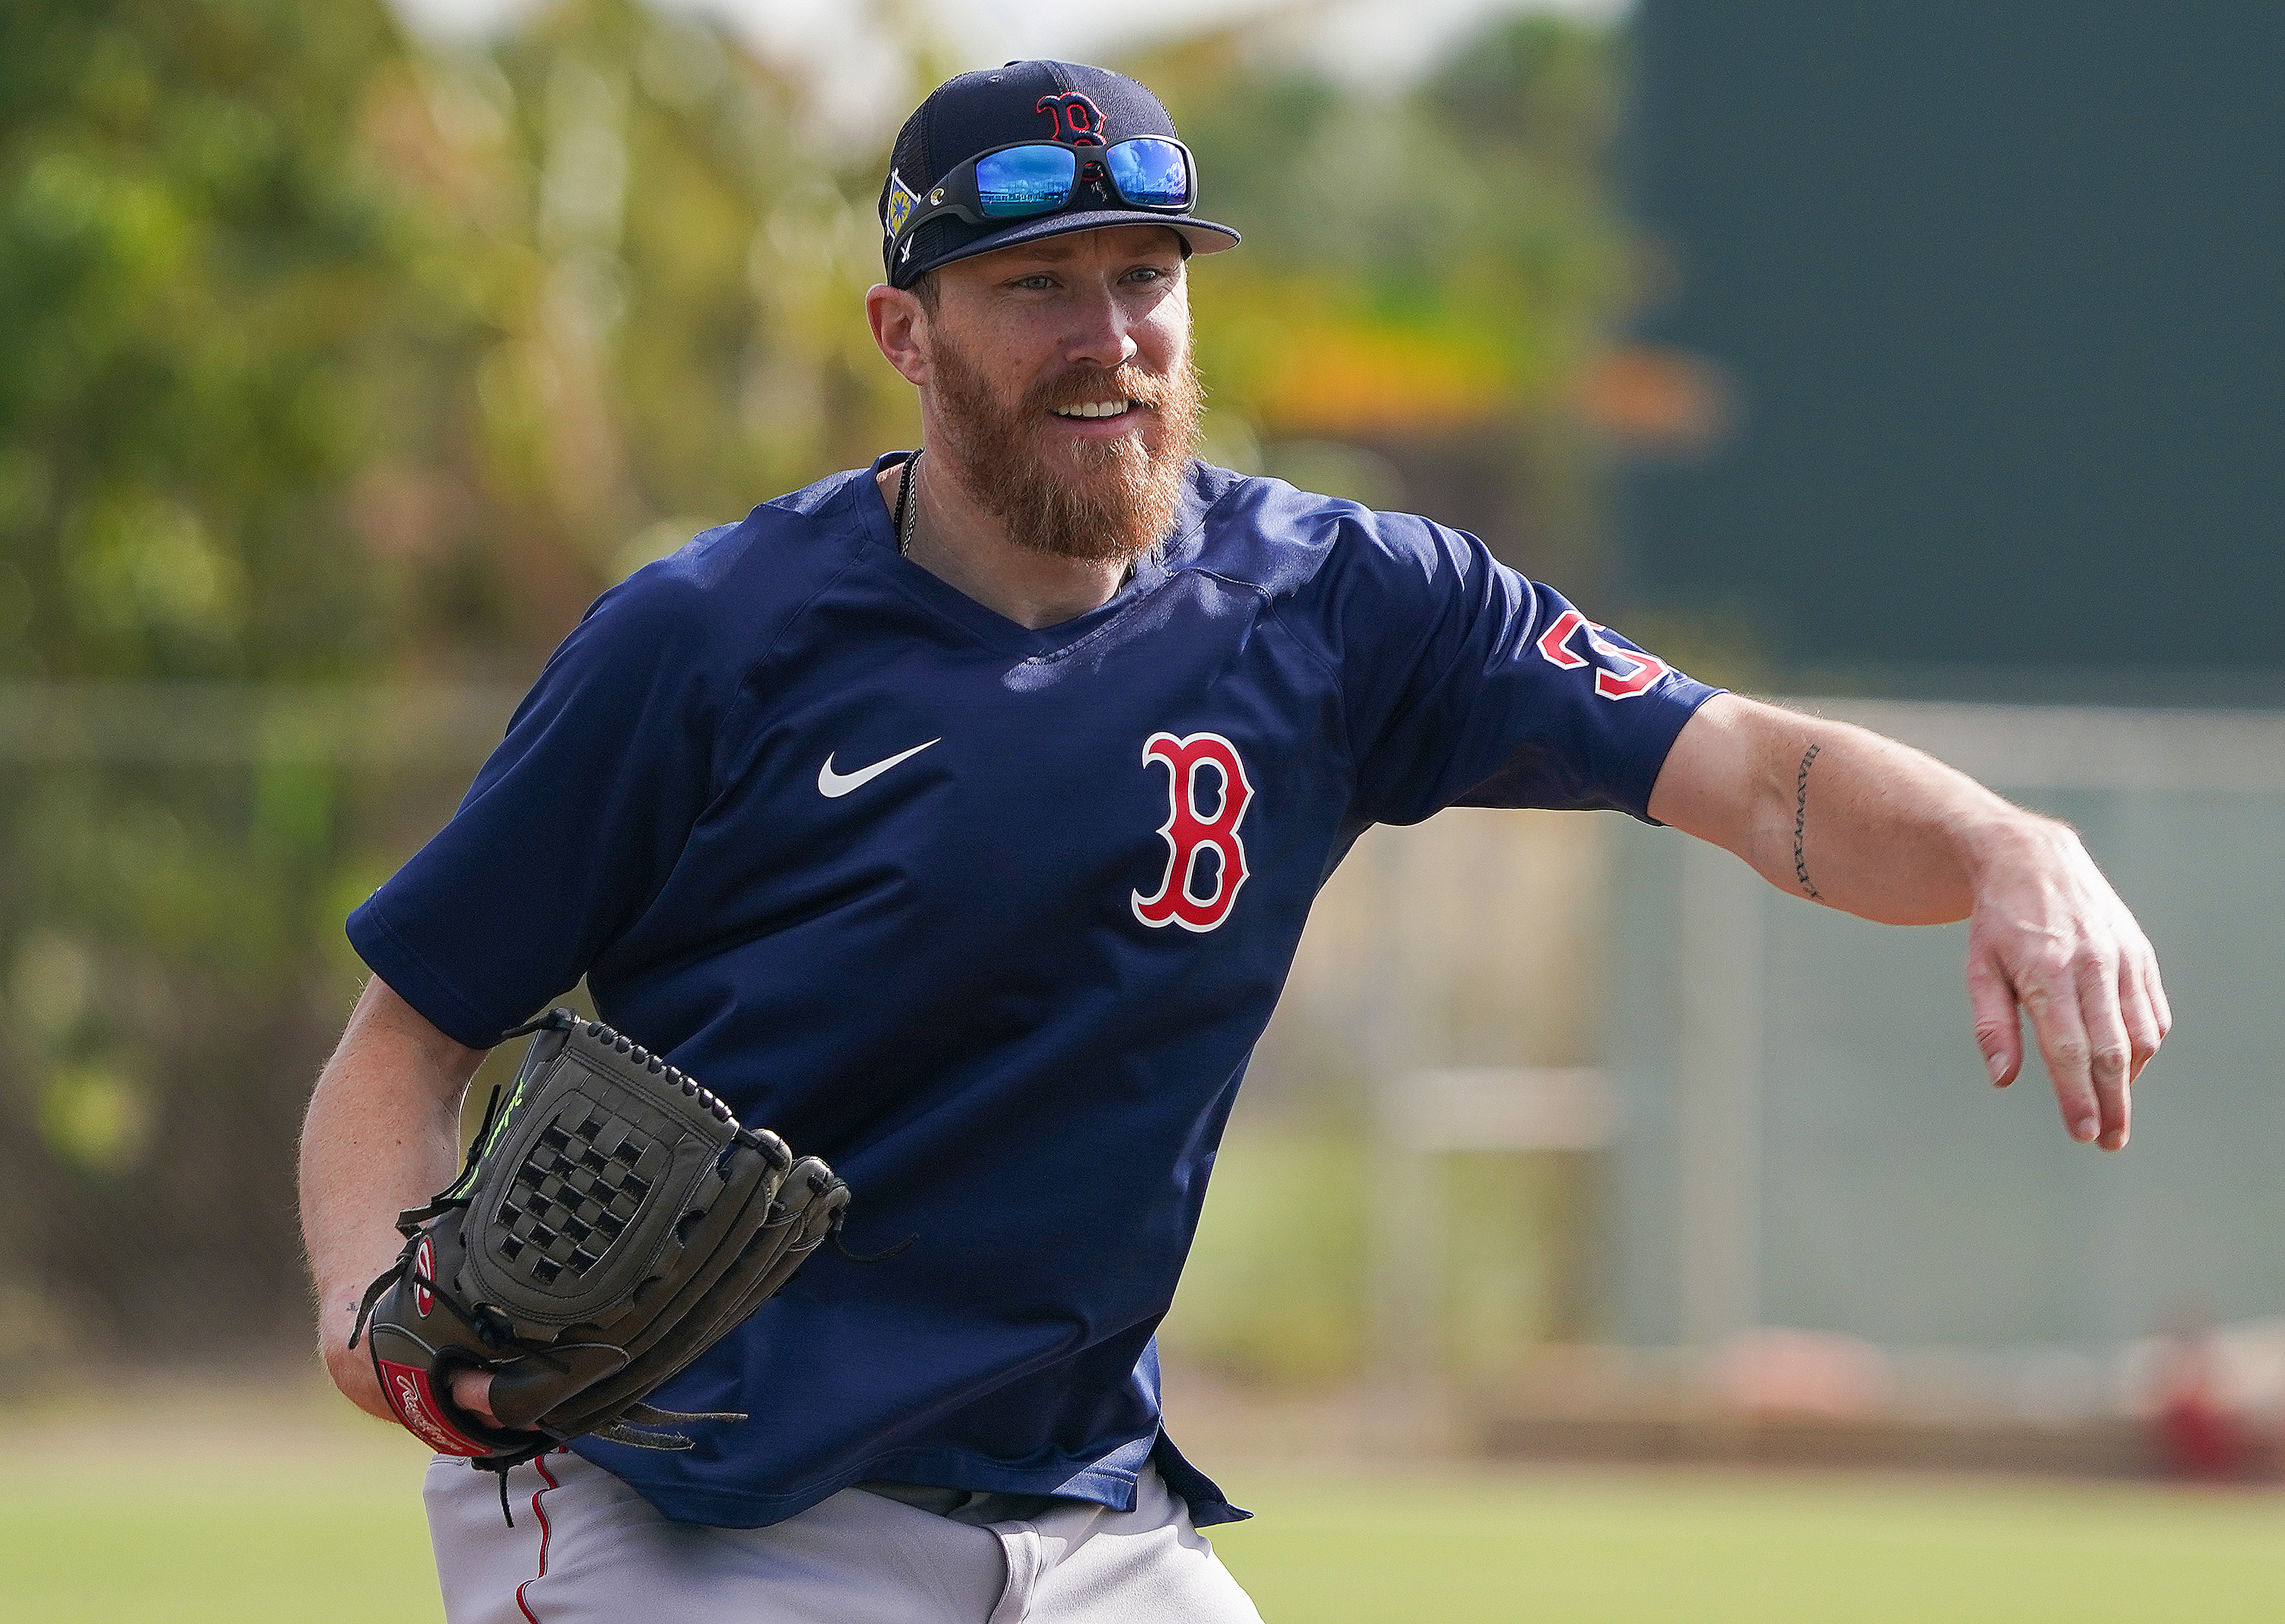 Report: White Sox acquire pitcher Jake Diekman from Red Sox for